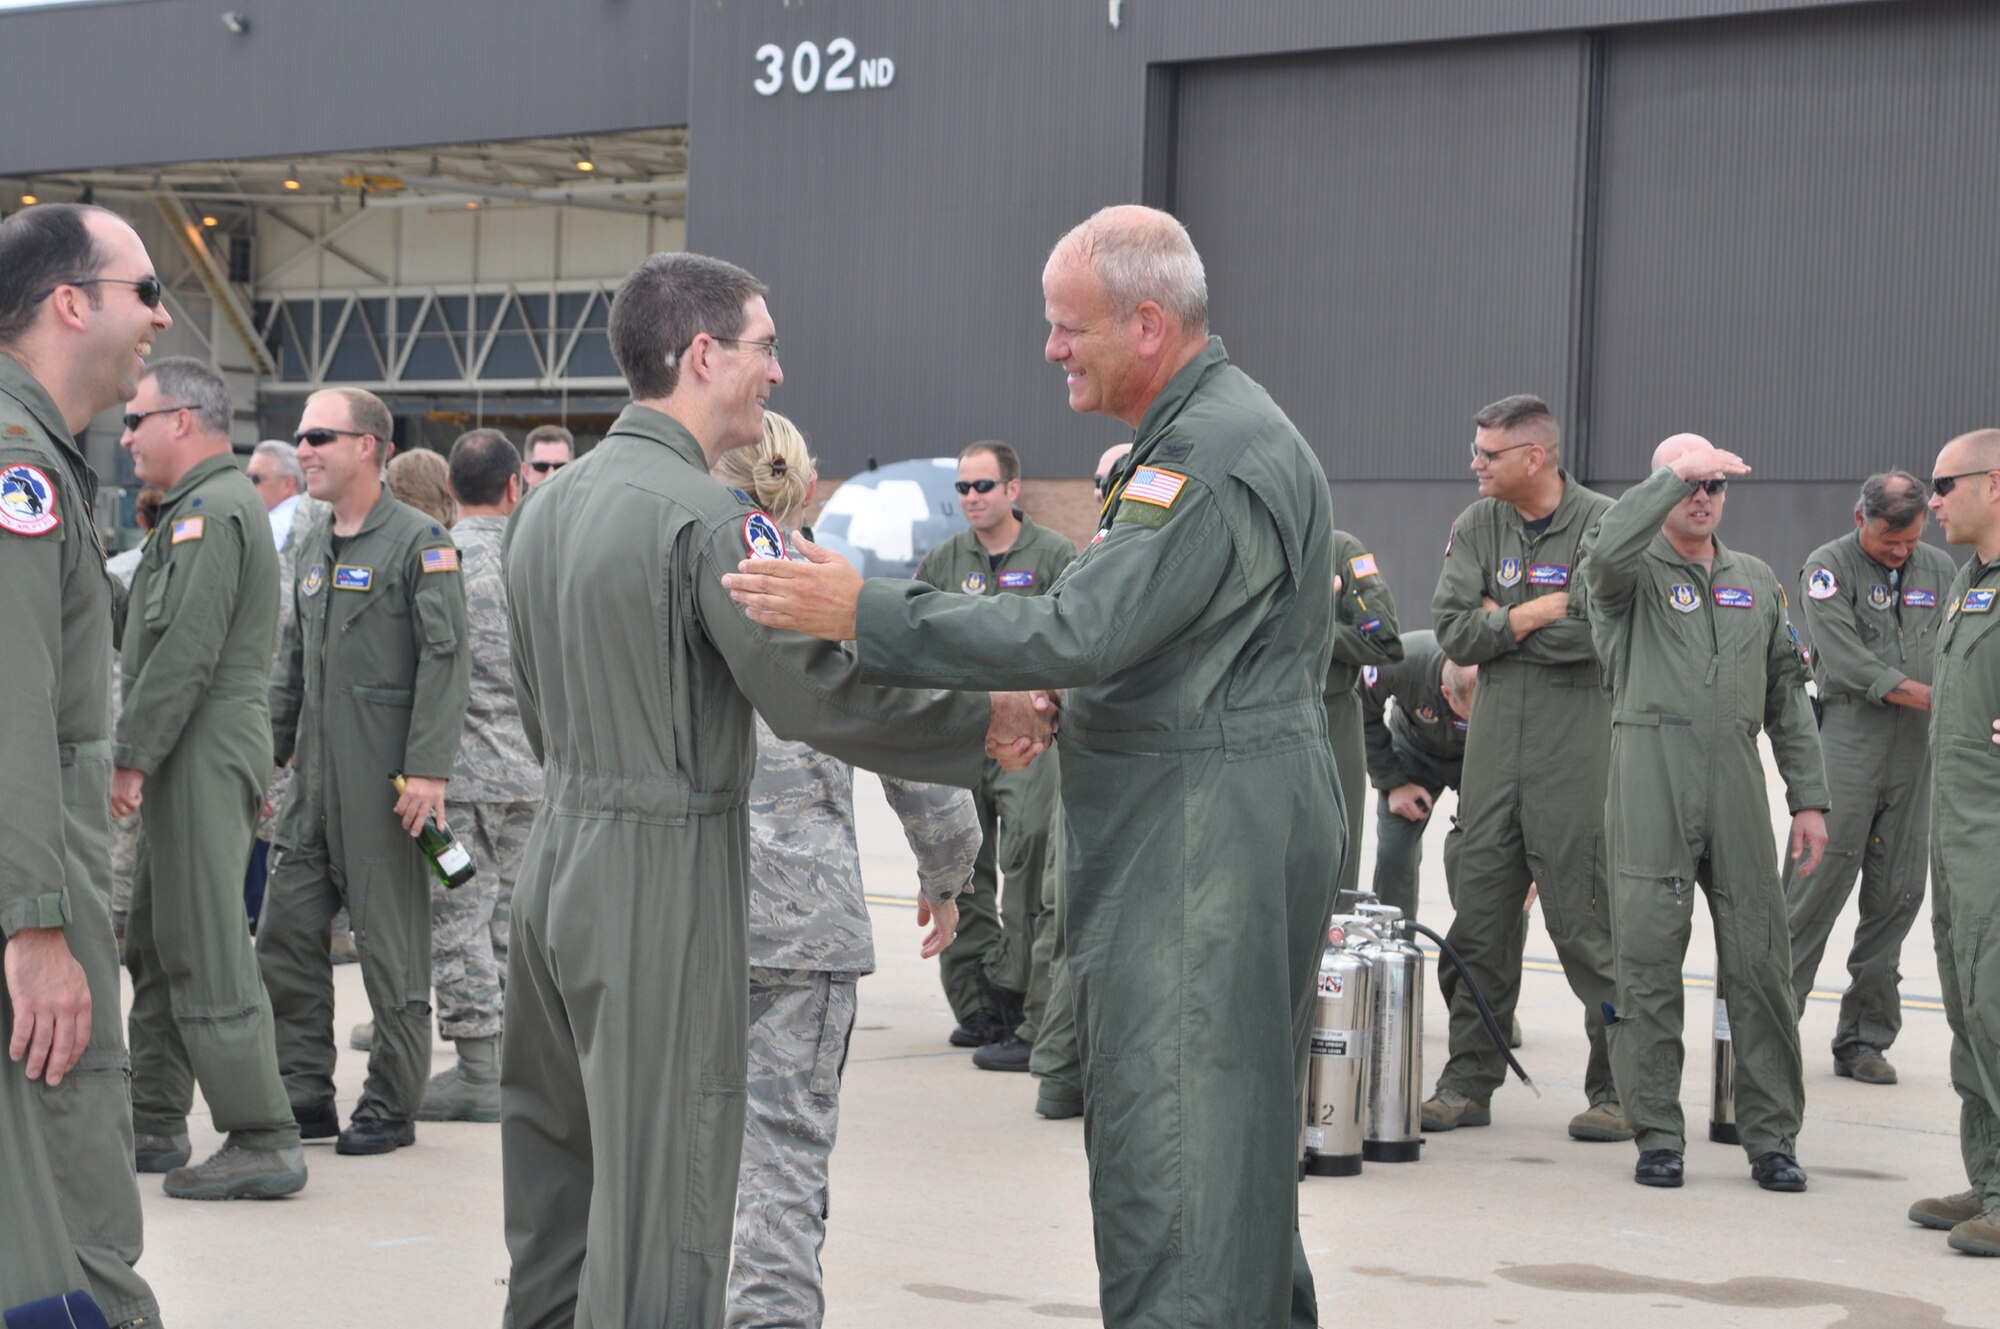 Col. Bob Chapman (right) is congratulated by Lt. Col. Harold Treffeisen, a C-130 Hercules pilot assigned to the 731st Airlift Squadron, after completing his final flight Aug. 8 at Peterson Air Force Base, Colo. This was the Air Force Reserve colonel's final flight with the 302nd AW, which culminated his military flying career with more than 5,200 hours of flight, including over combat zones. Colonel Chapman, who relinquished his position as the wing's vice commander during the August unit training assembly, has served in the Air Force since 1978 when he joined as an enlisted member. The colonel left Active Duty in 1992, becoming an Air Force Reserve member with the 302nd AW. During that time, he commanded the 731st AS during a deployment to the Middle East and during numerous aerial firefighting activations. The colonel is projected to retire in March 2011. (U.S. Air Force photo/Ann Skarban)